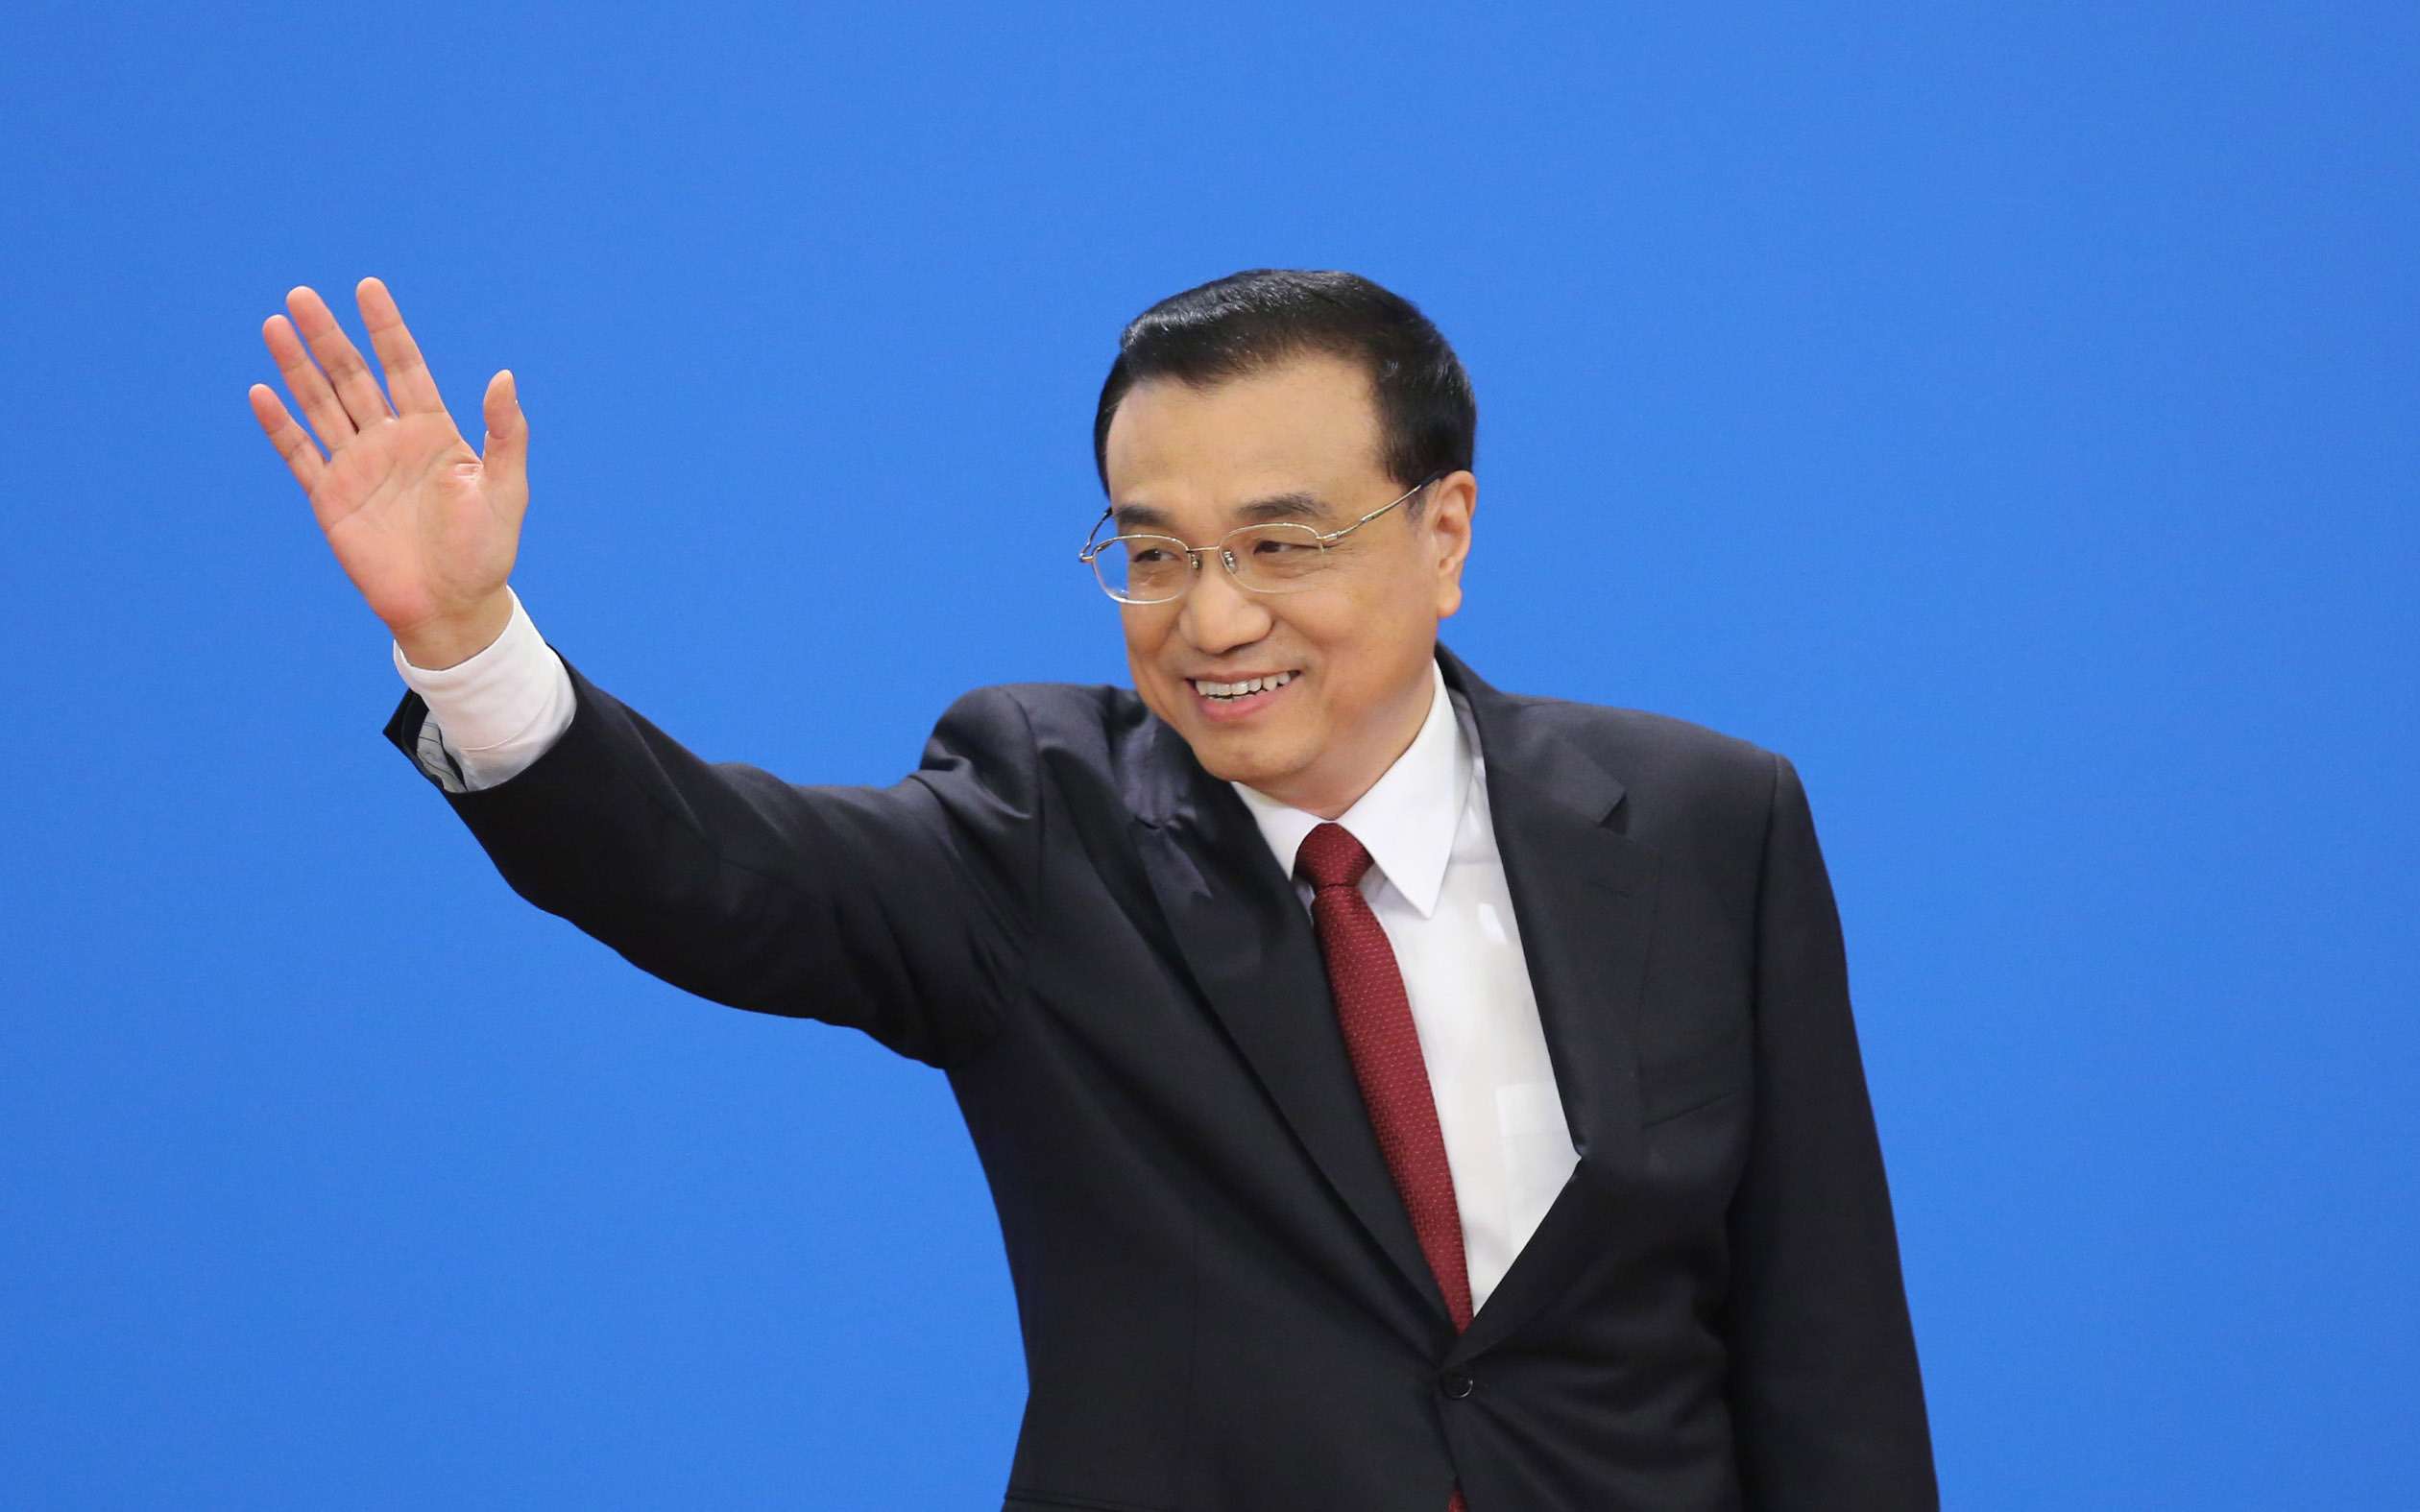 Premier Li Keqiang greets journalists at the Great Hall of the People in Beijing in 2016. Photo: Xinhua